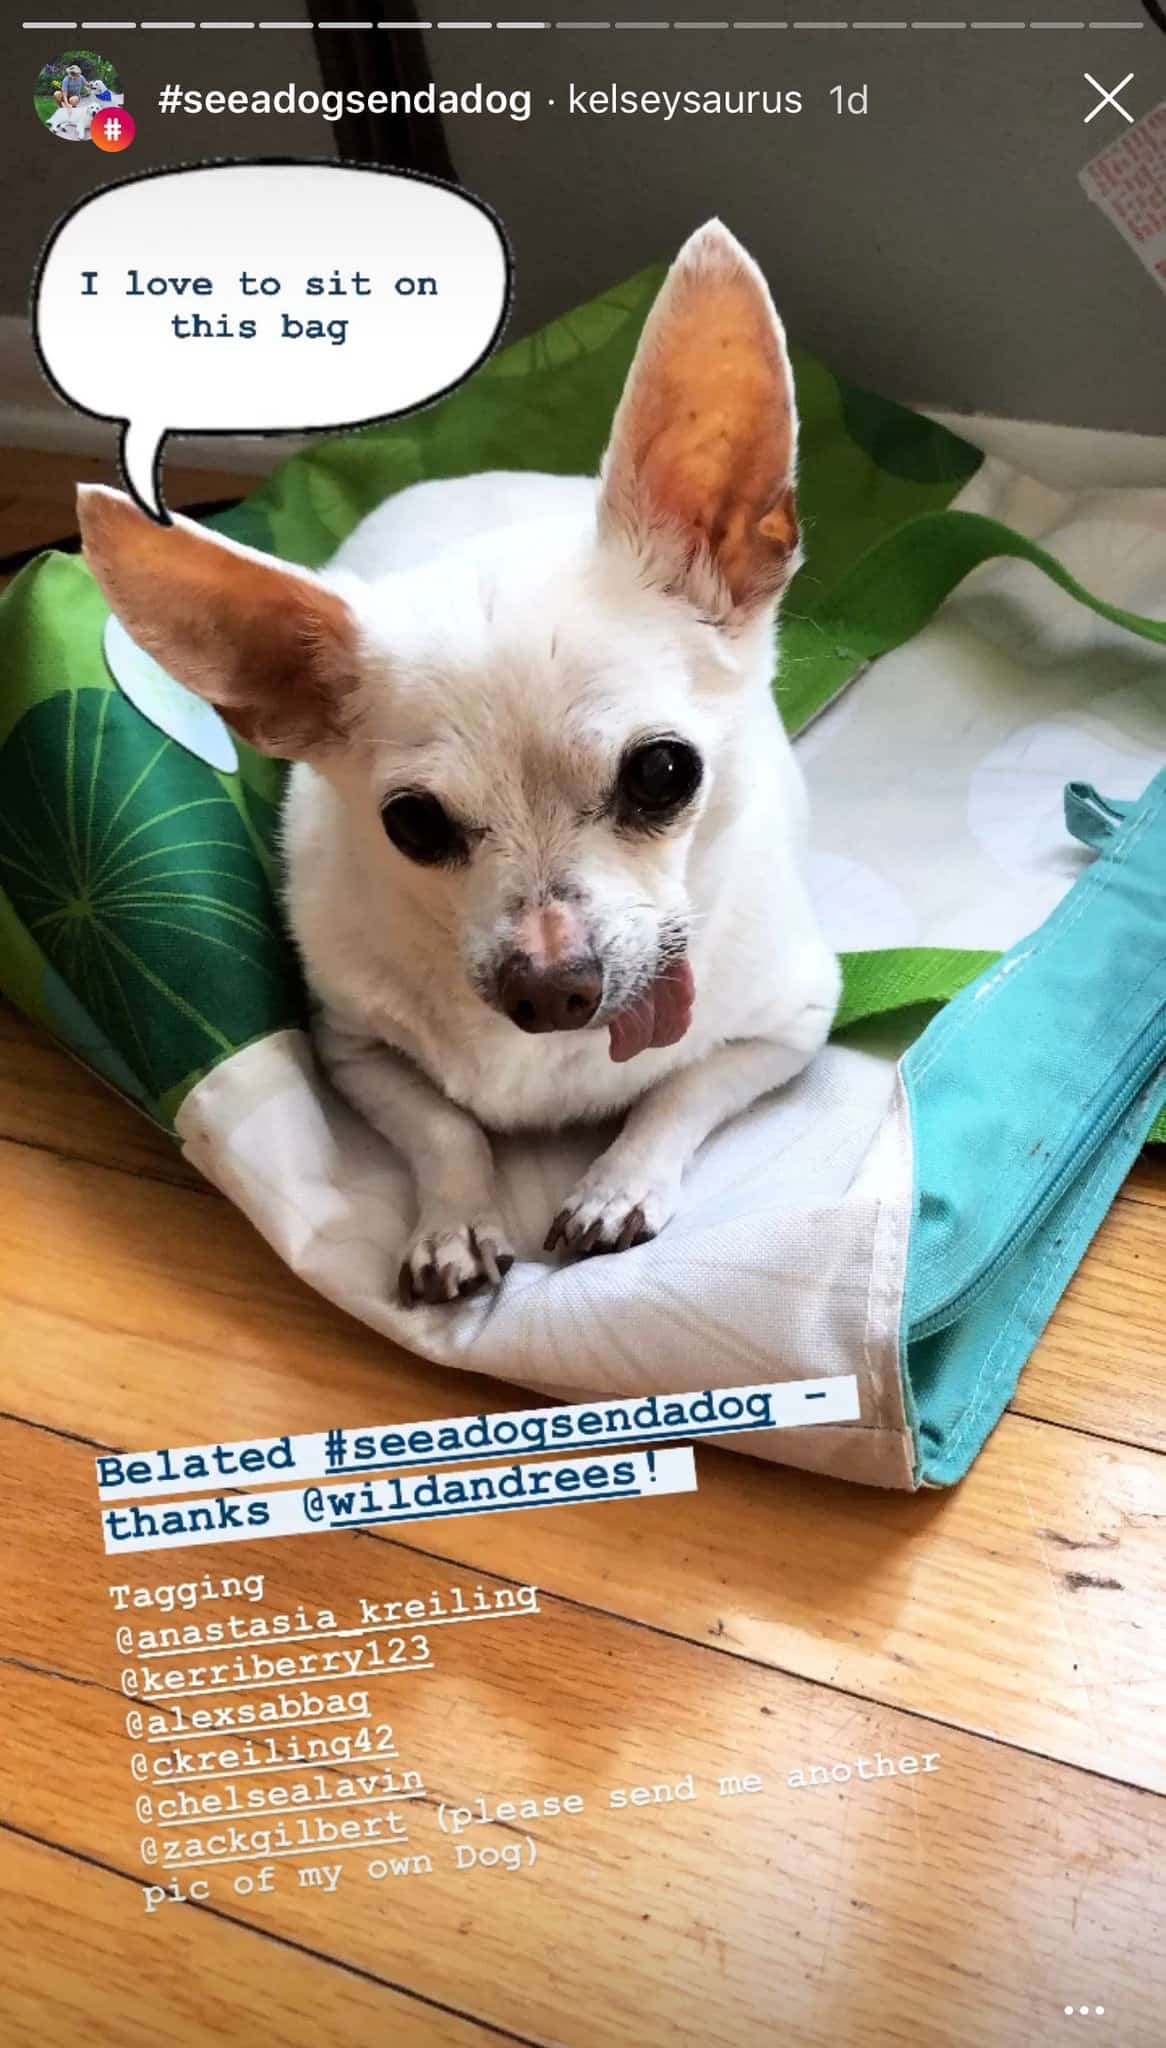 Instagram story of 'See a Dog, Send a Dog' Challenge